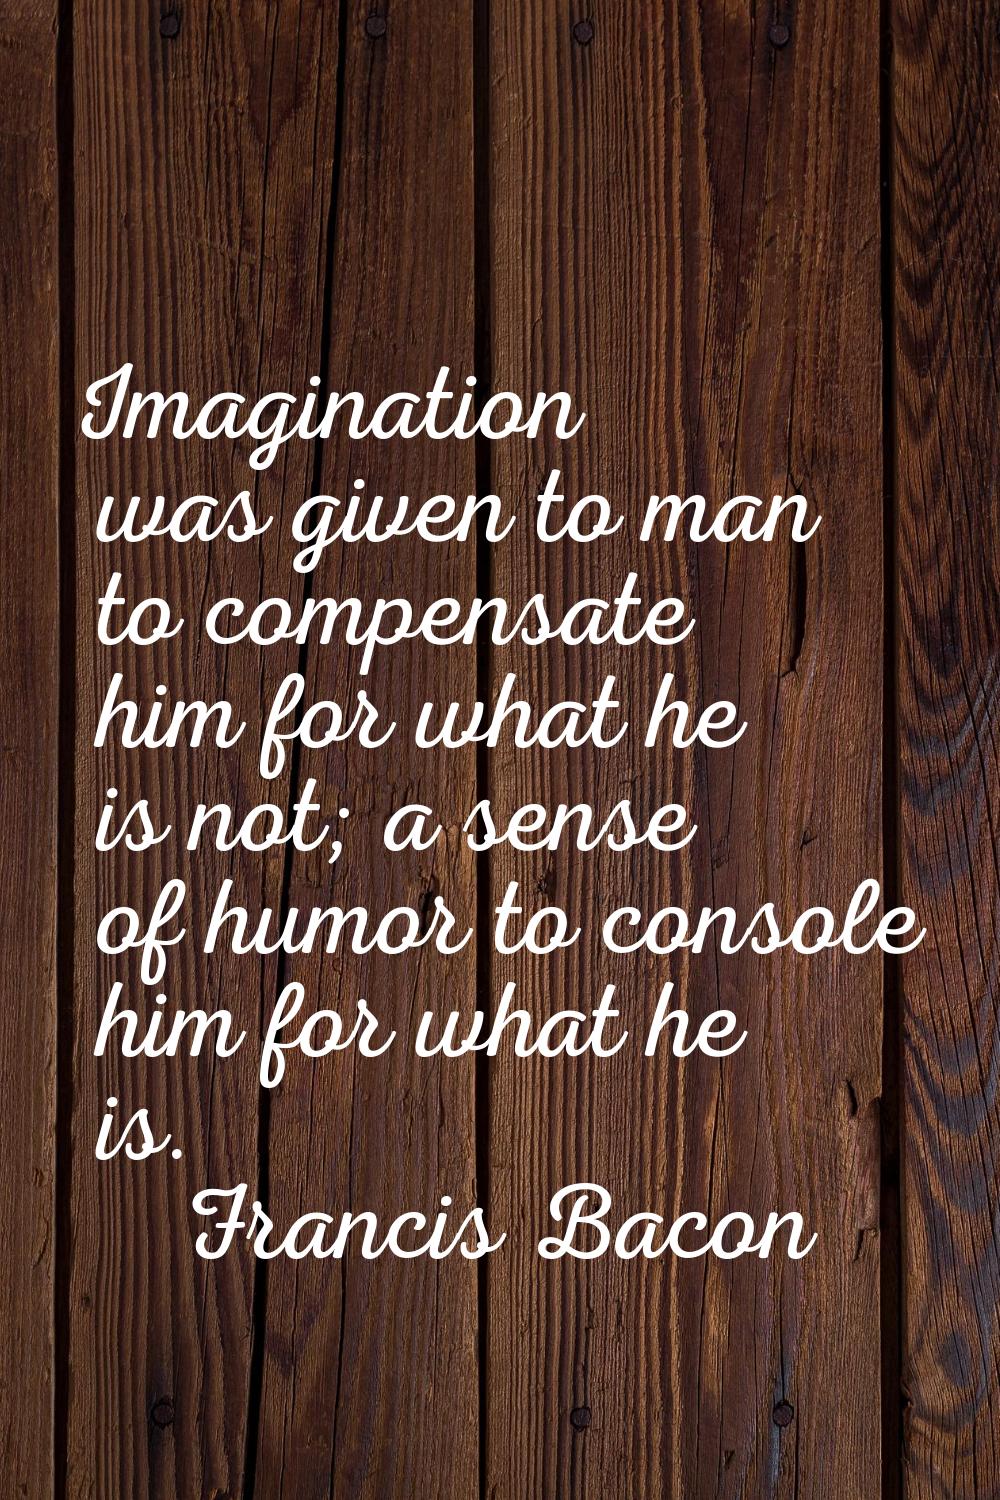 Imagination was given to man to compensate him for what he is not; a sense of humor to console him 